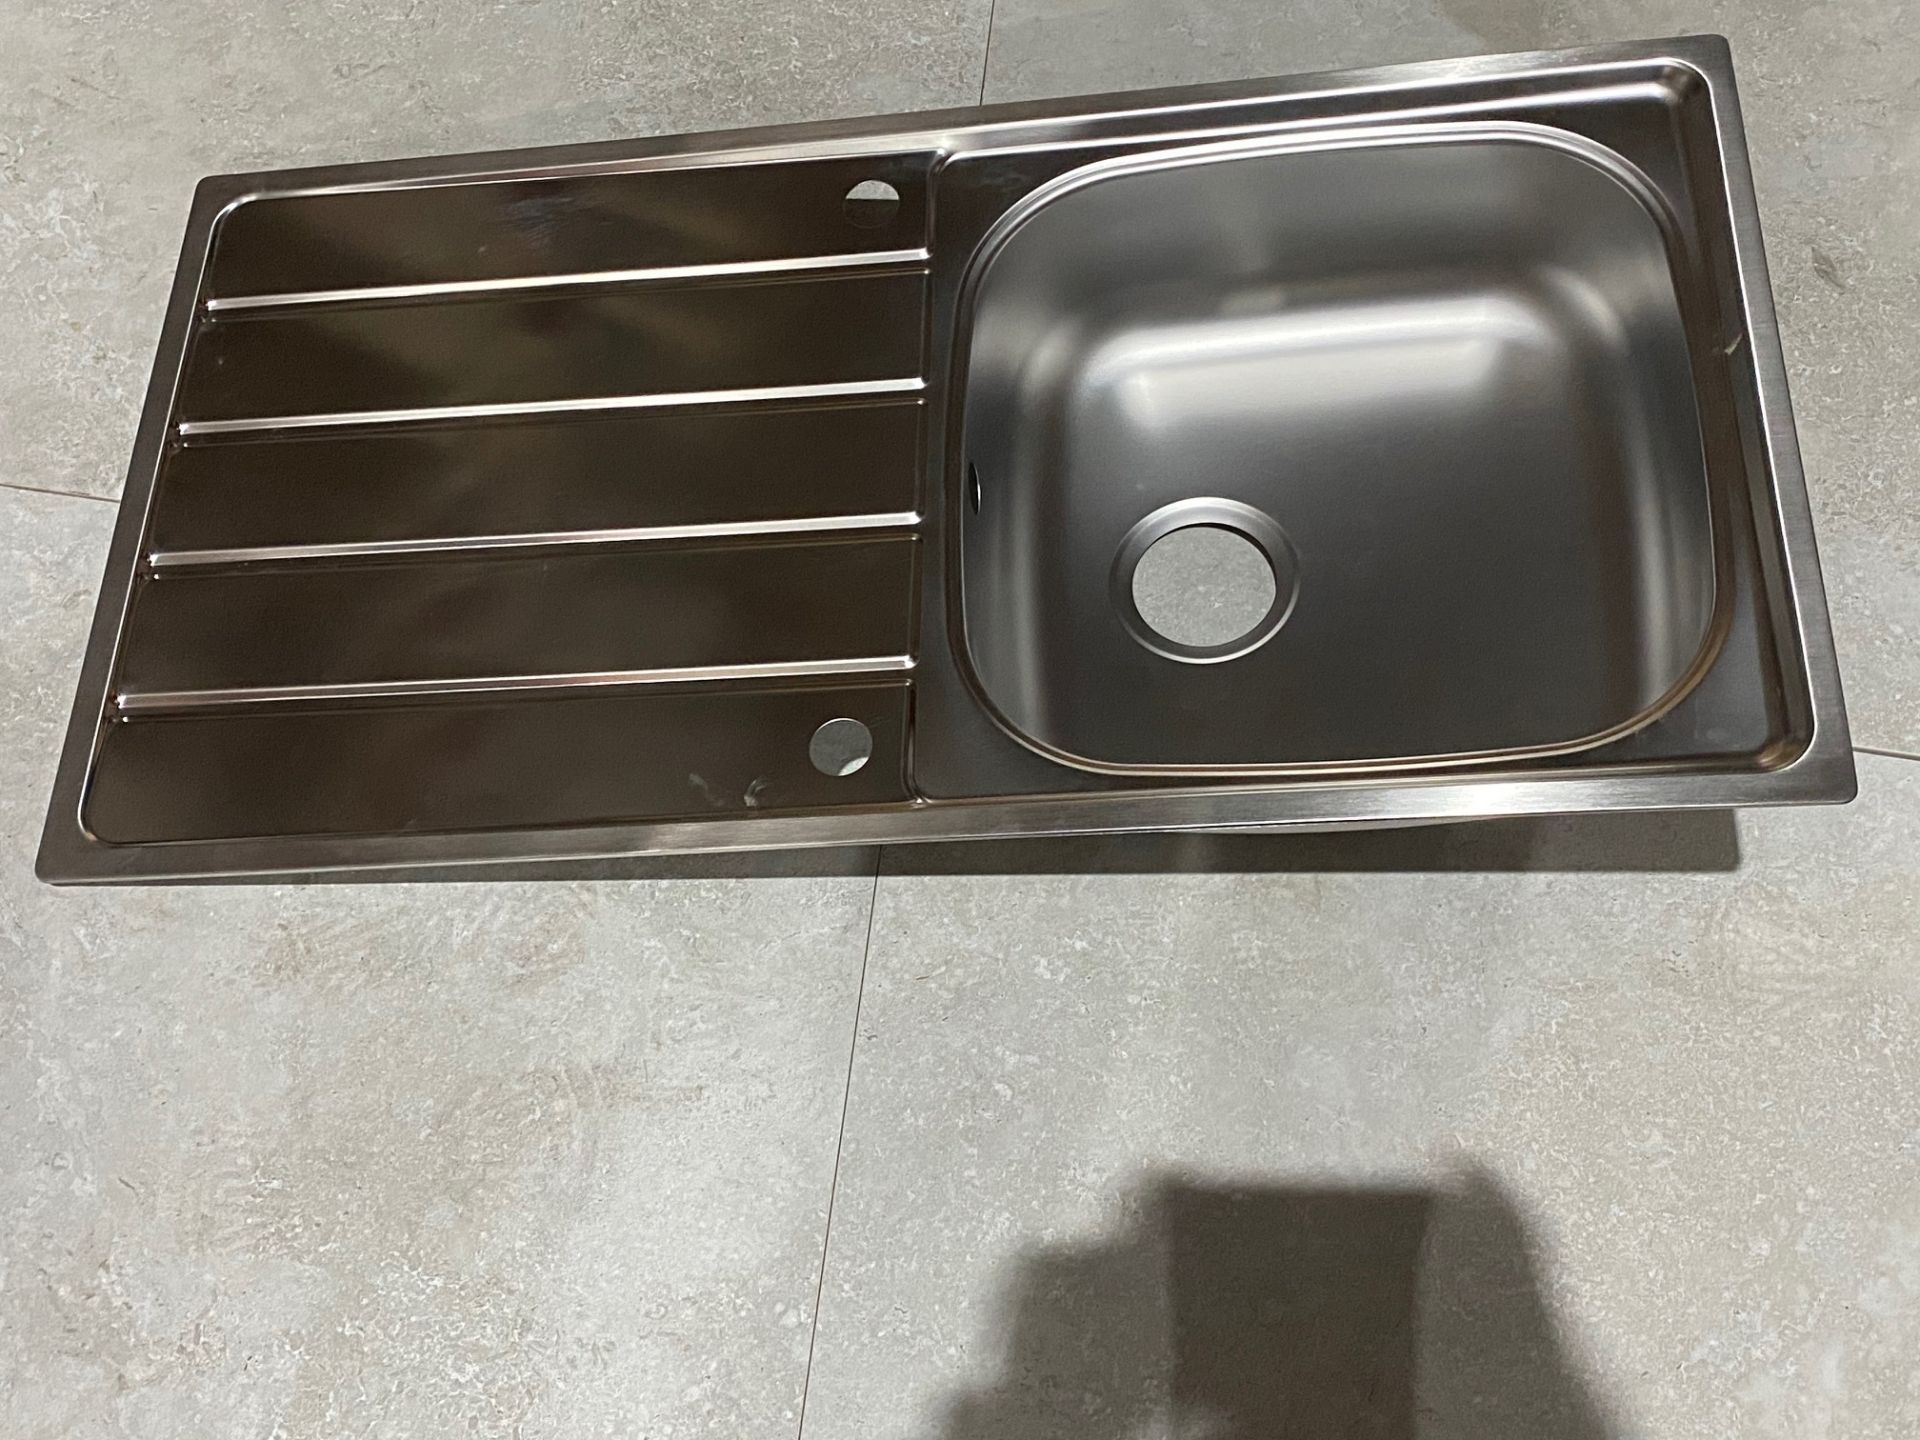 New (H115) 970x500mm Teka Stainless Steel Sink Bowl.  New (H115) 970x500mm Teka Stainless Steel Sink - Image 2 of 2